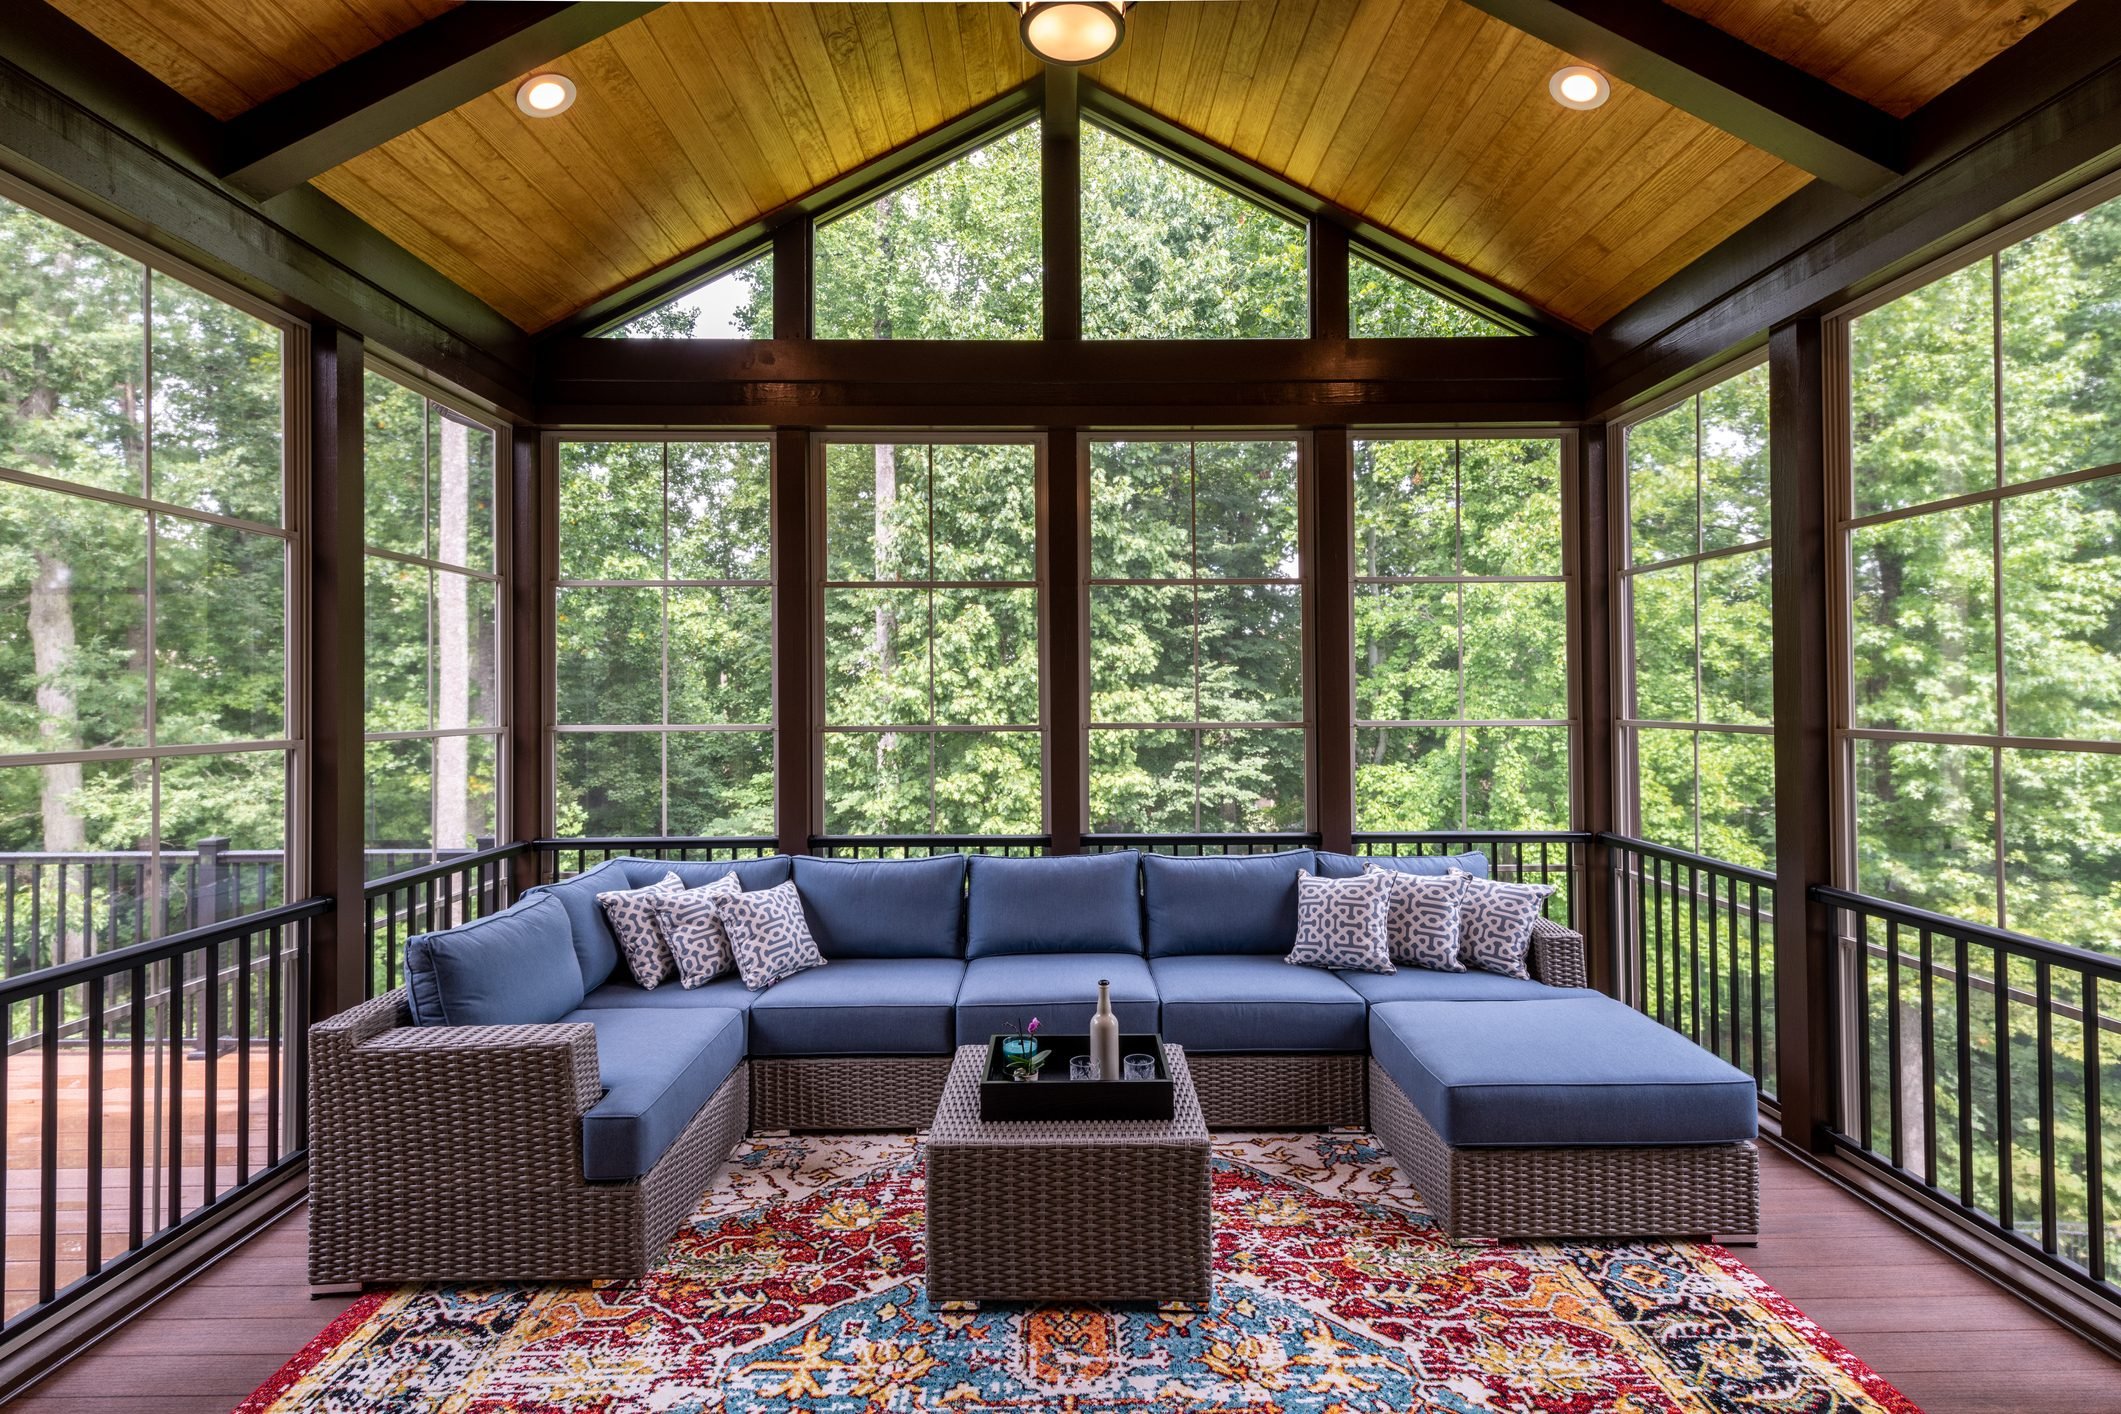 Sunroom vs. Screened Porch: What's the Difference? | Family Handyman